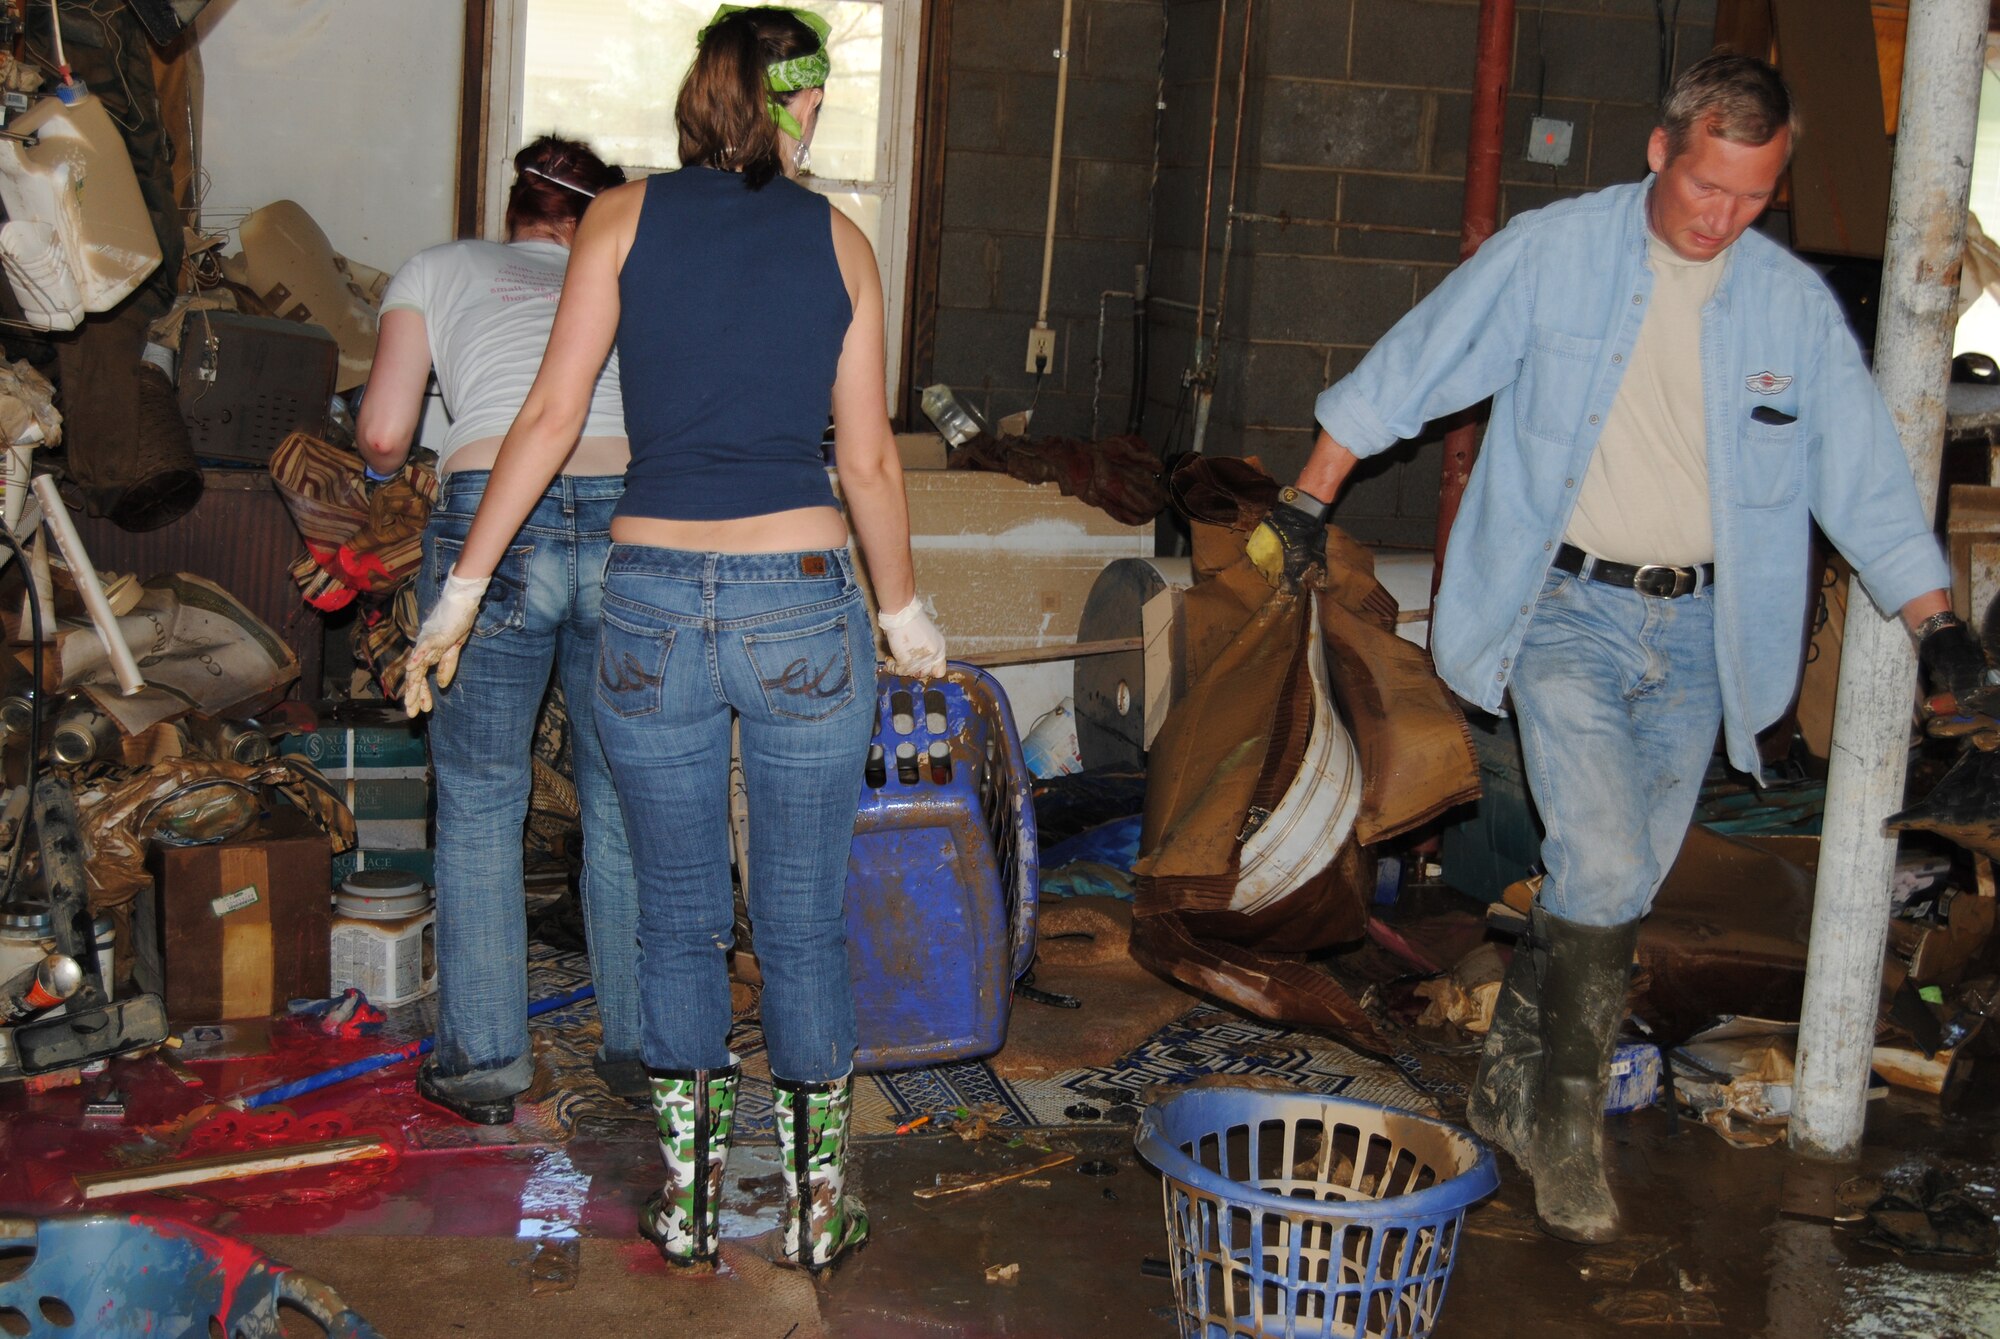 May 8, Jessica Armocida and Stephanie Moyer assist SMSgt Jim Johnson, 118th Airlift Wing Aircrew Flight Equipment Superintendent, is cleaning out his garage after it was destroyed by the May 1 and 2 flooding.